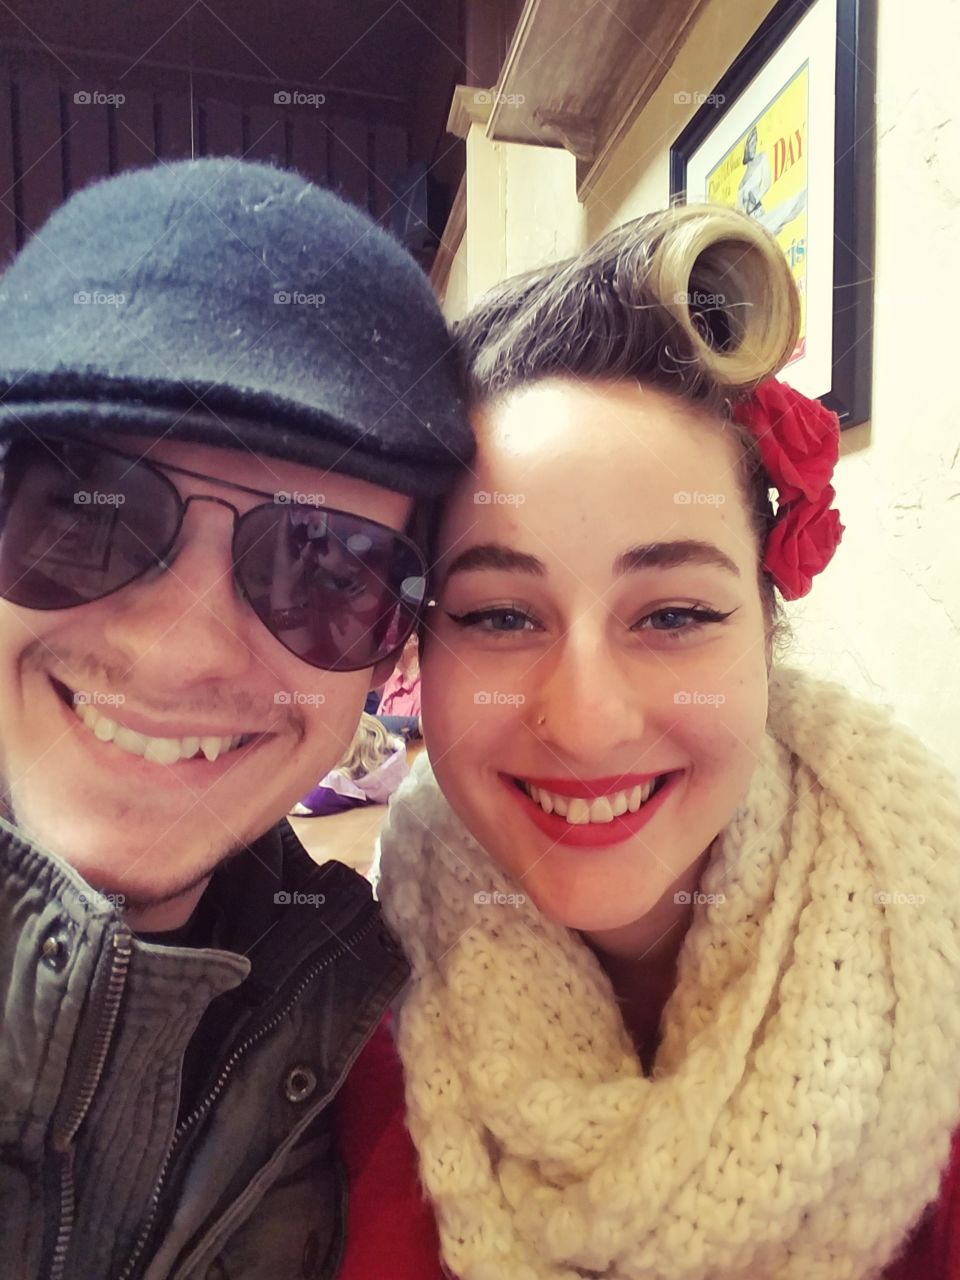 Cute Rockabilly Retro Couple Smiling with Vintage Hair and Hat